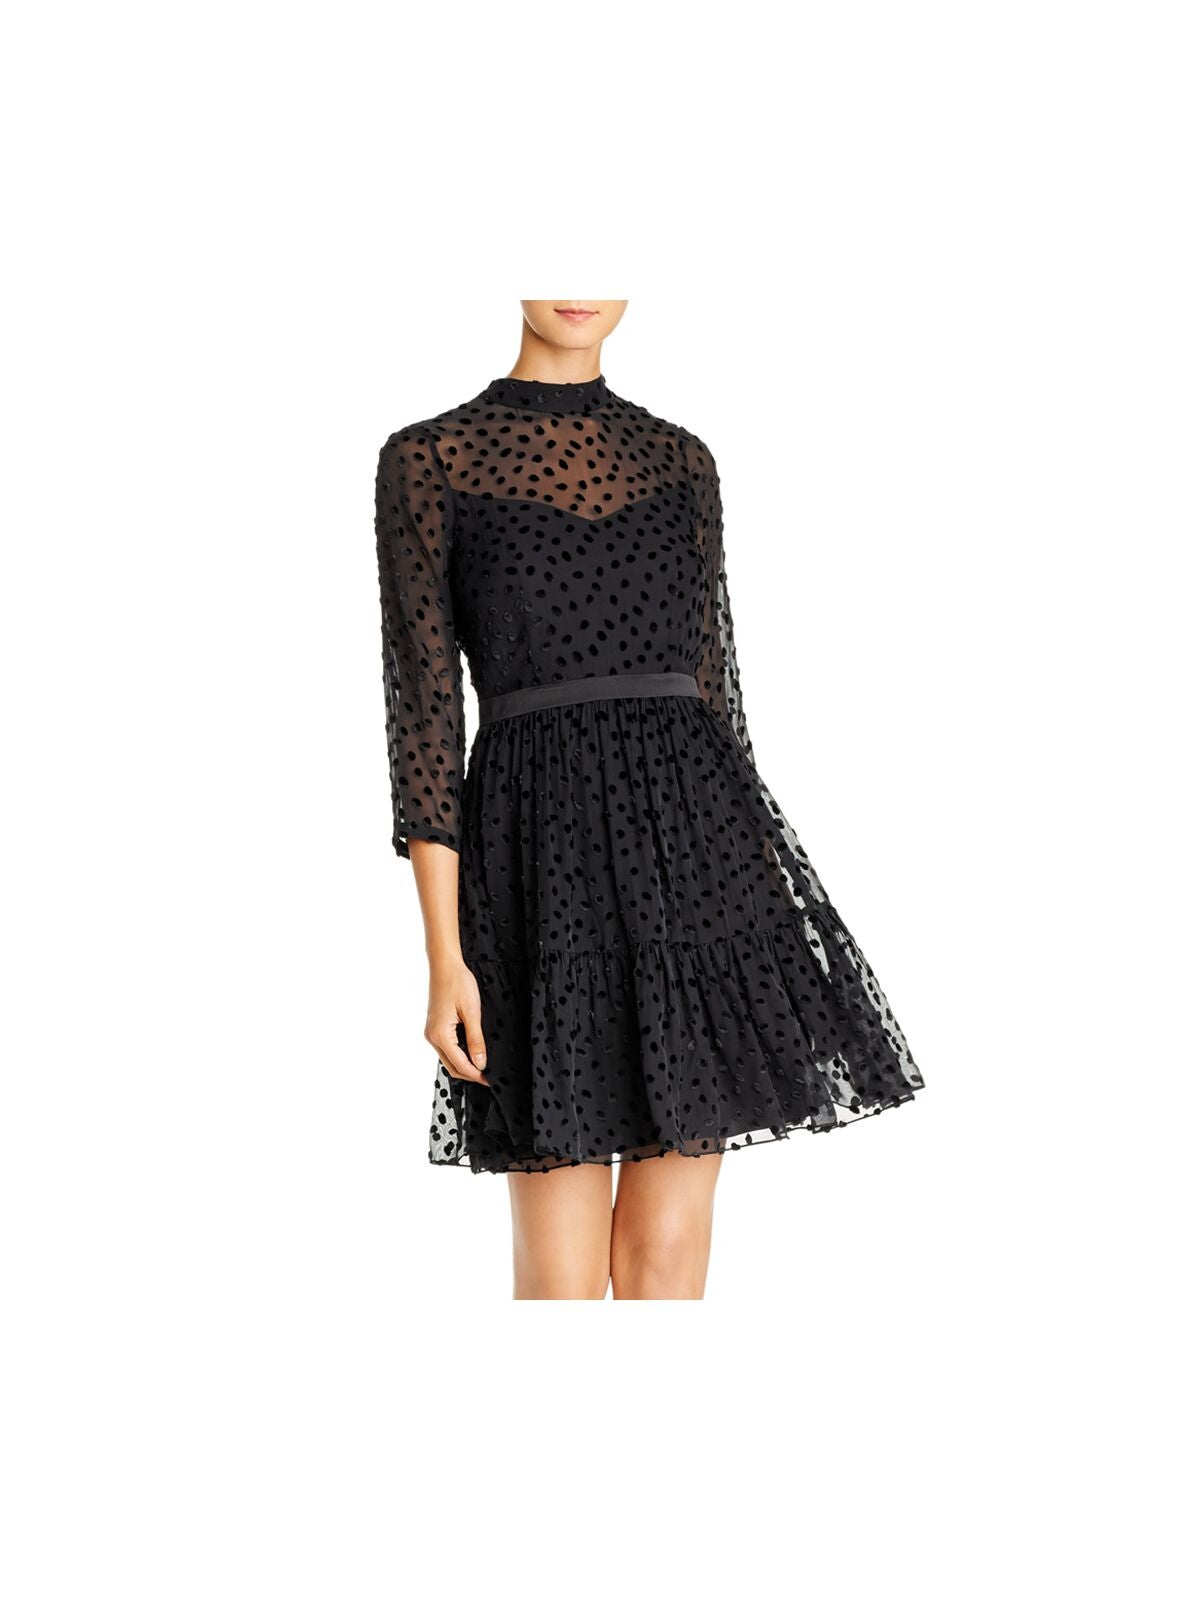 REBECCA TAYLOR Womens Black Zippered Cut Out Partially Lined Sheer Ruffled Polka Dot 3/4 Sleeve Mock Neck Above The Knee Fit + Flare Dress 10